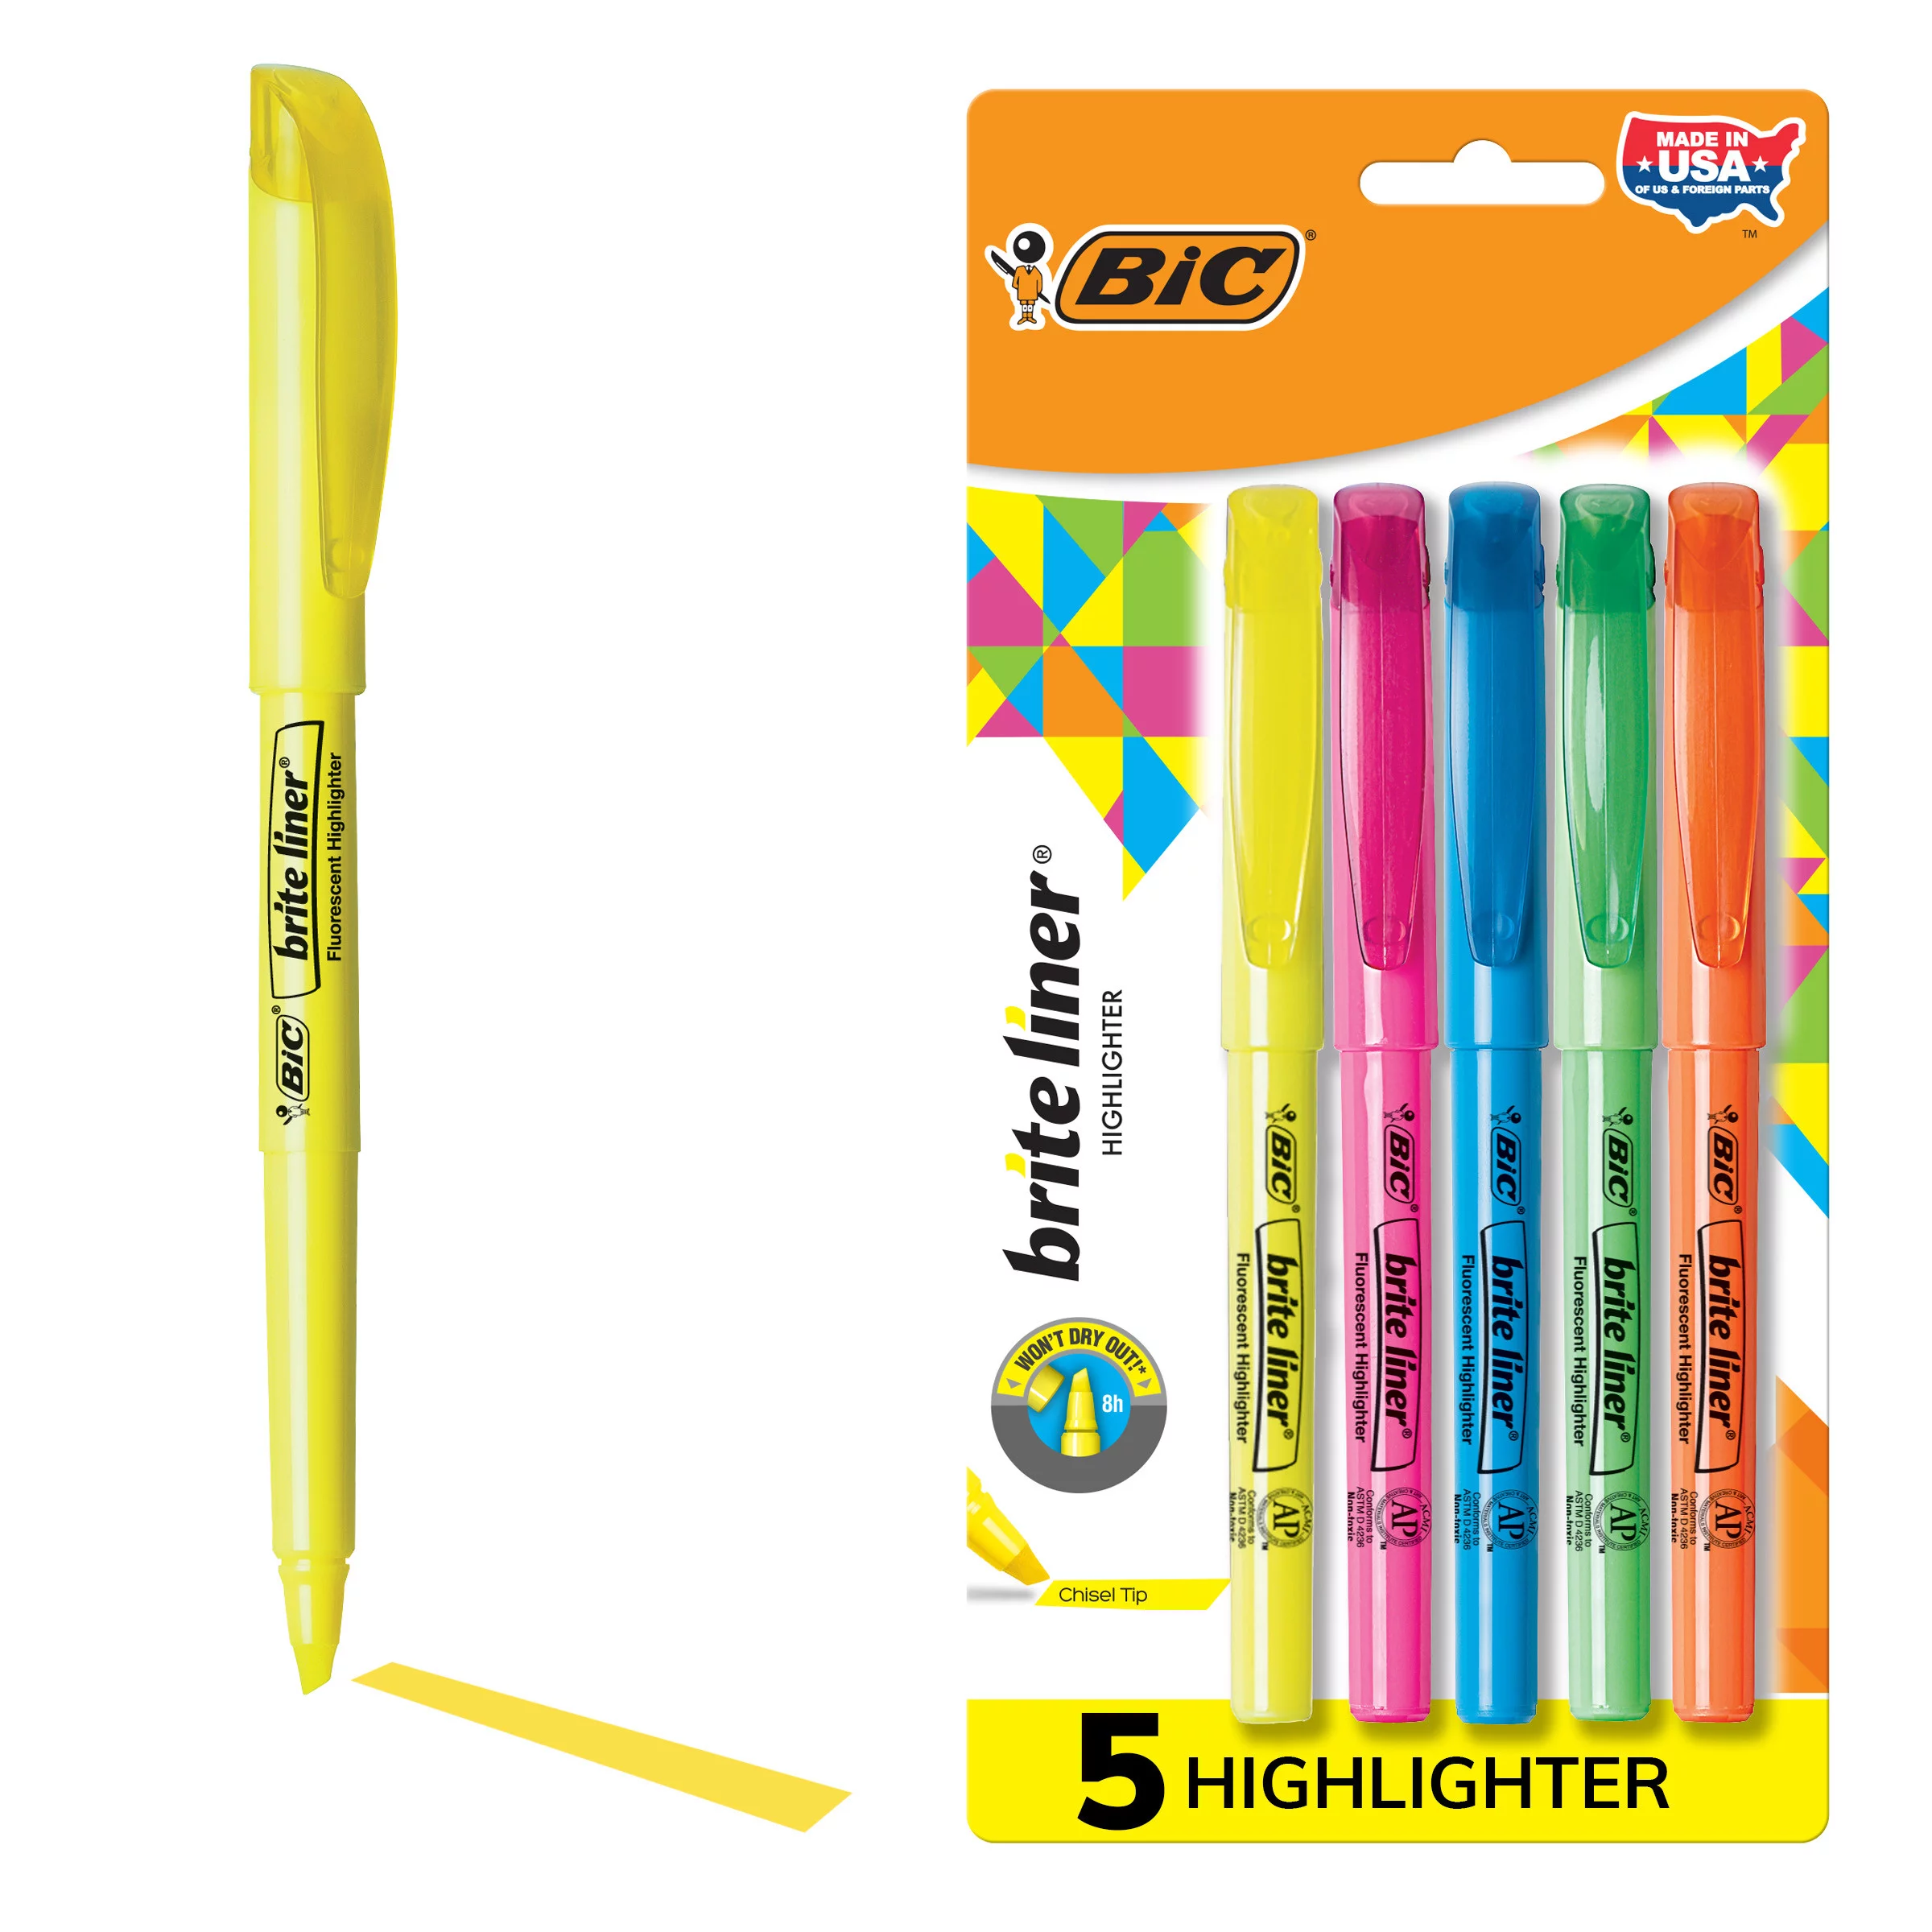 BIC Brite Liner Highlighters, Chisel Tip, Assorted Colors, 5 Count